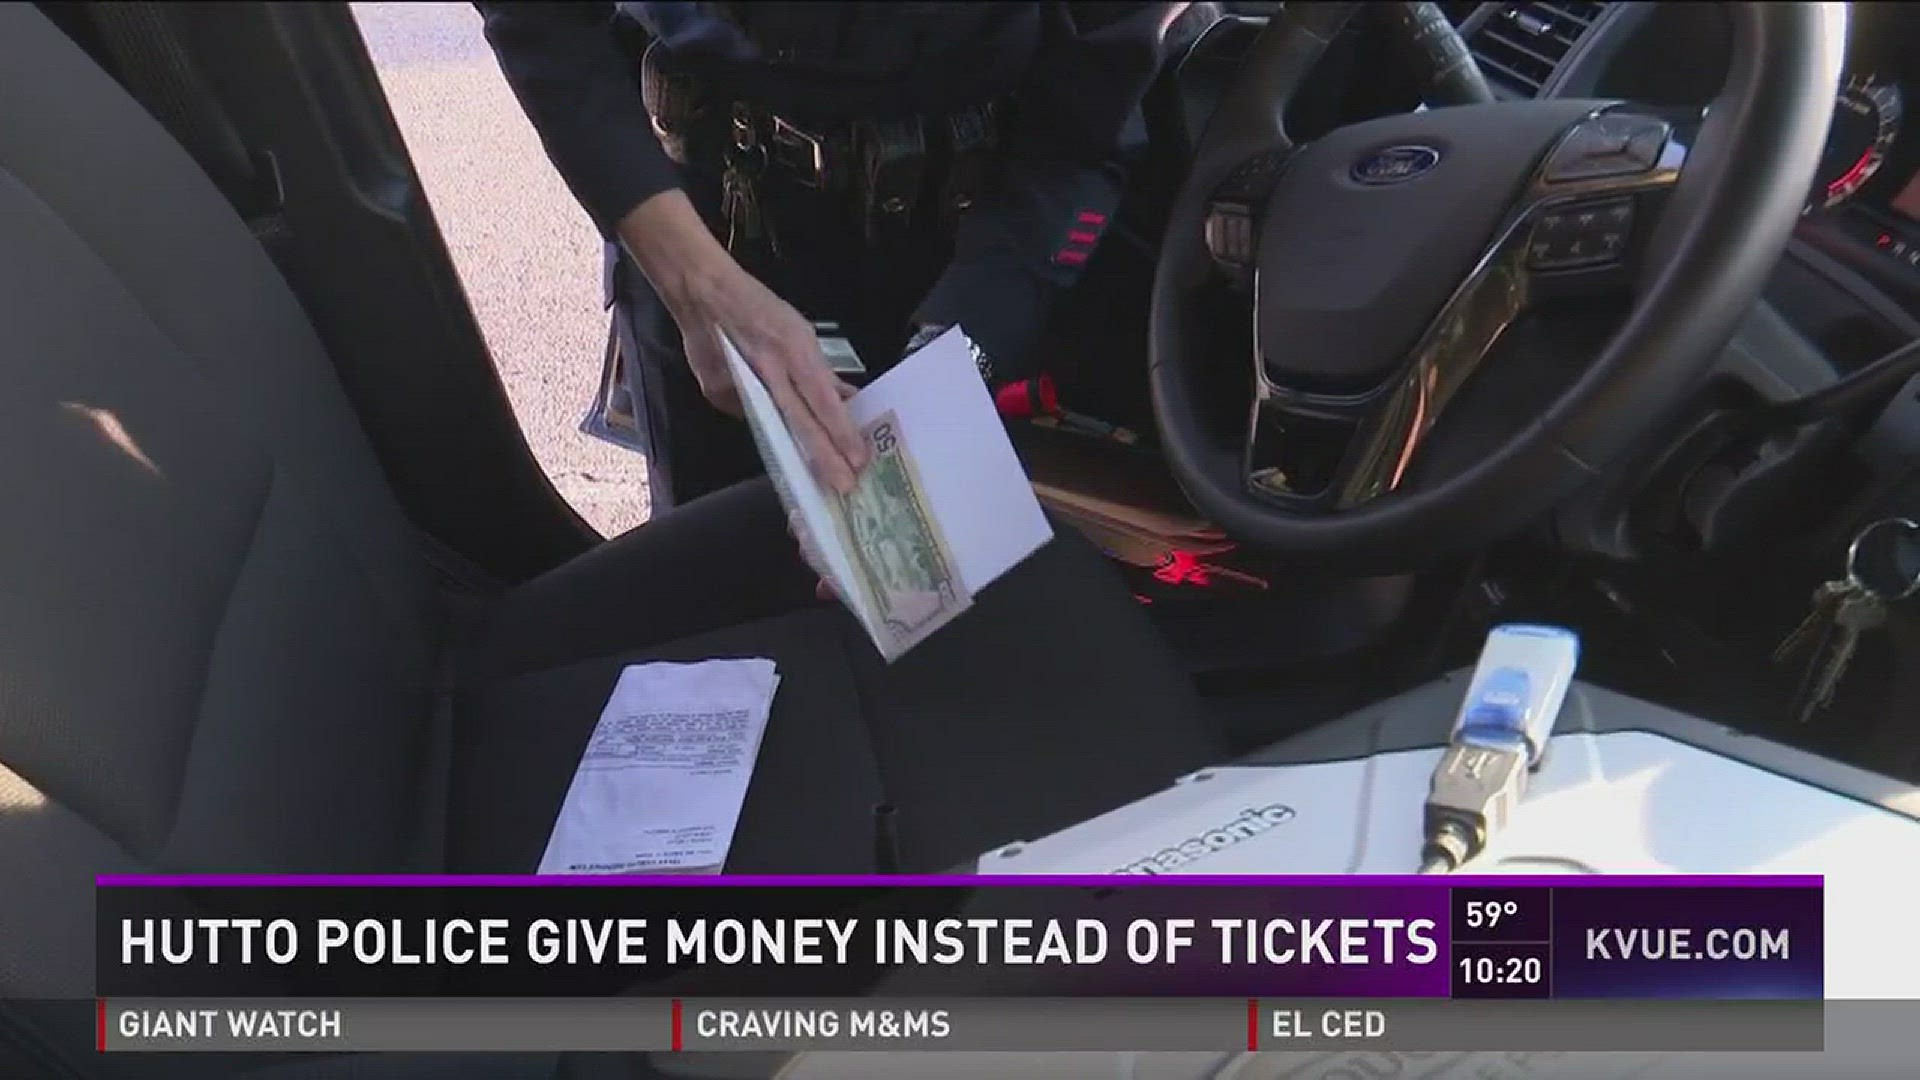 Hutto police give money instead of tickets